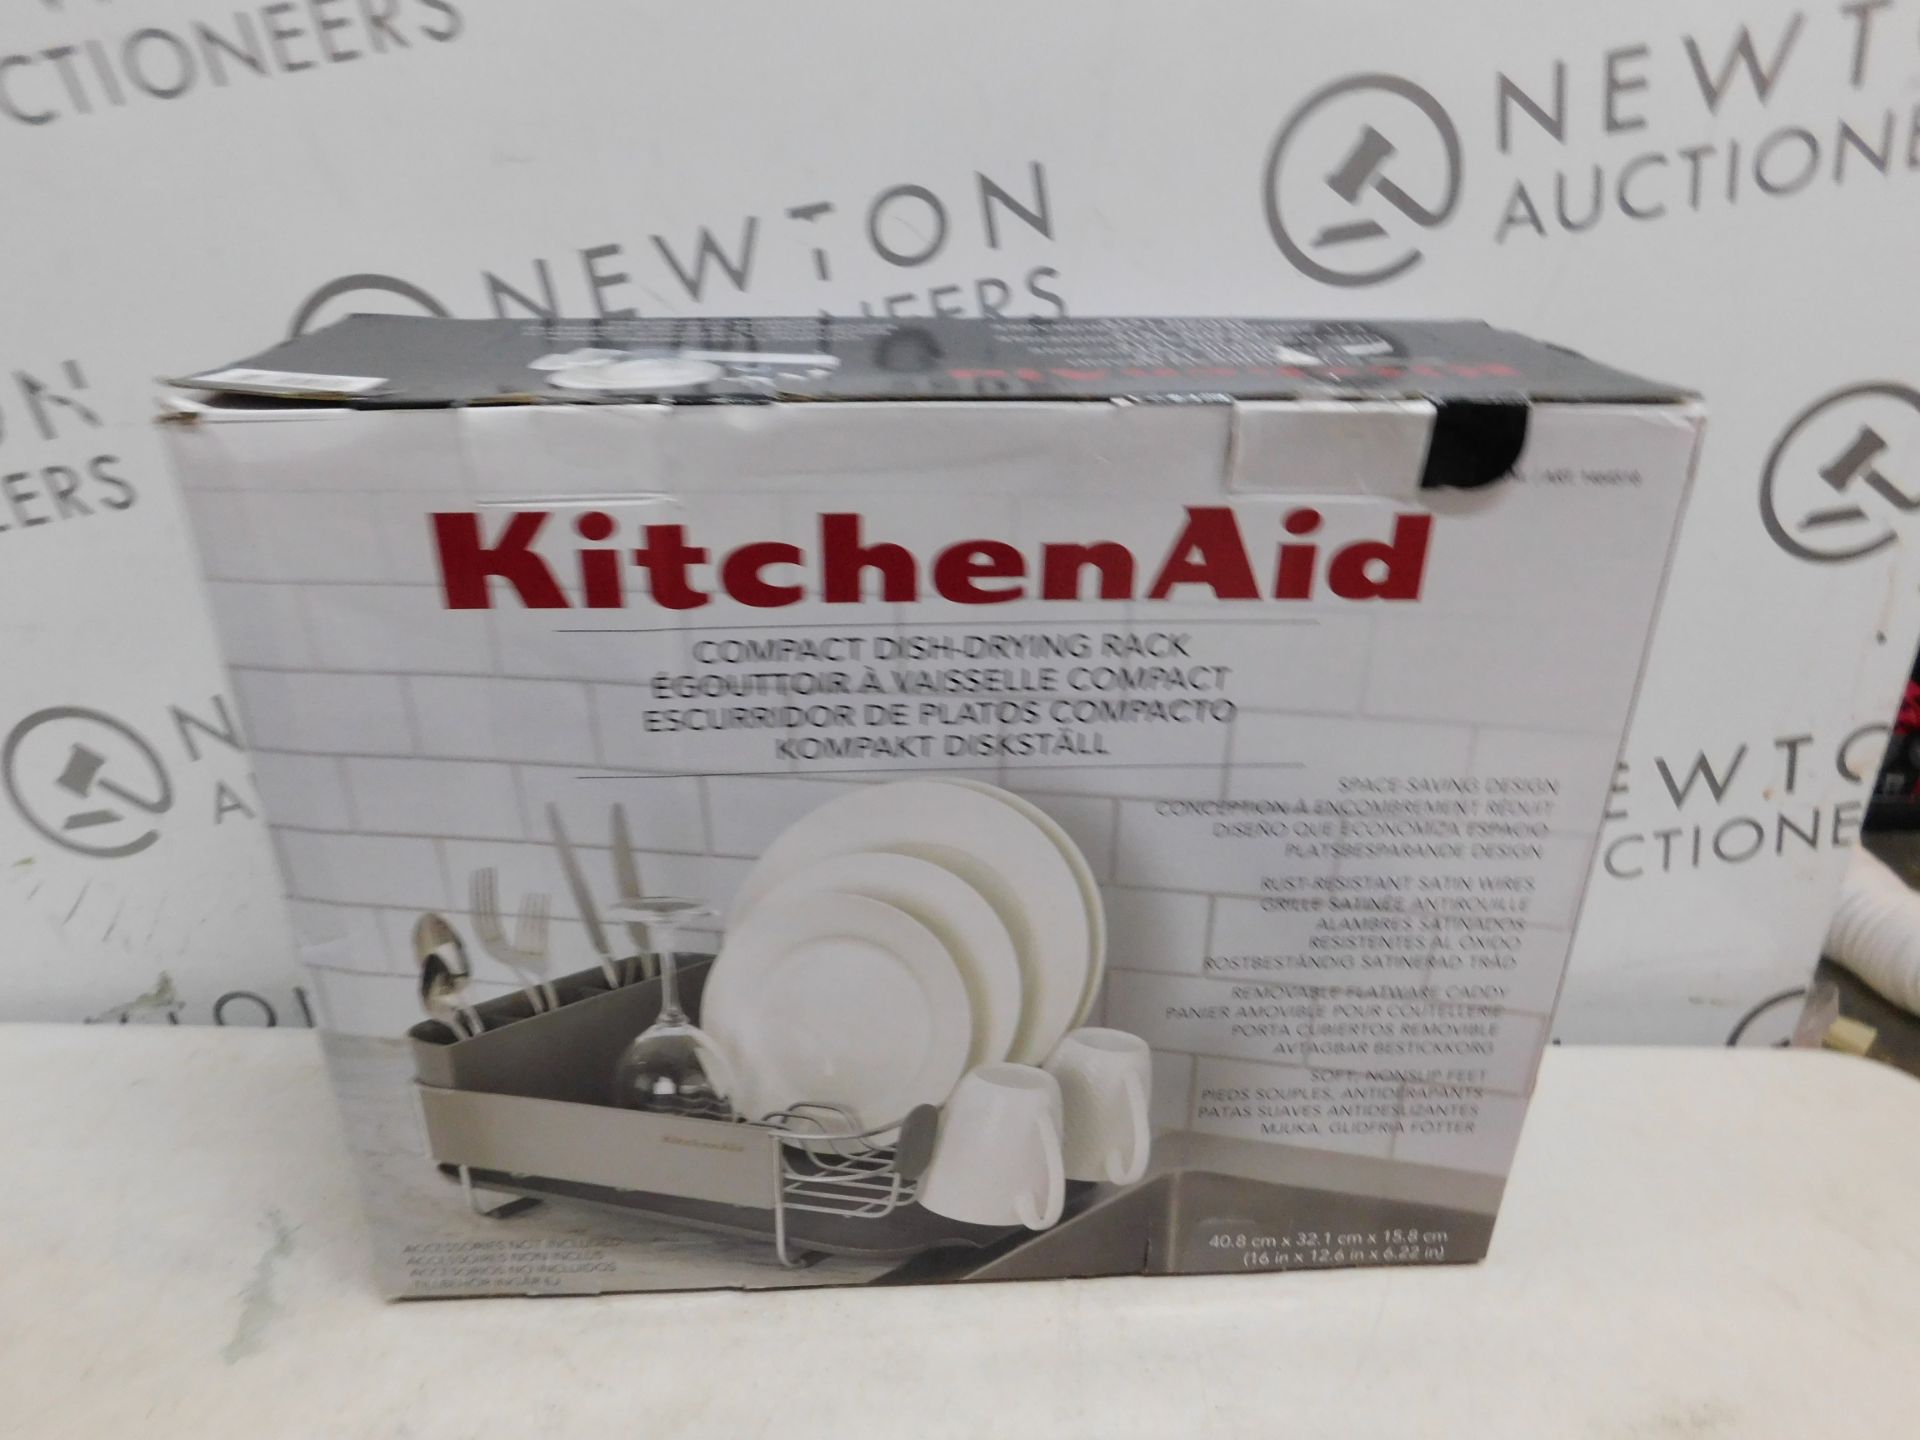 1 BOXED KITCHENAID COMPACT DISHRACK WITH STAINLESS STEEL PANEL RRP Â£39